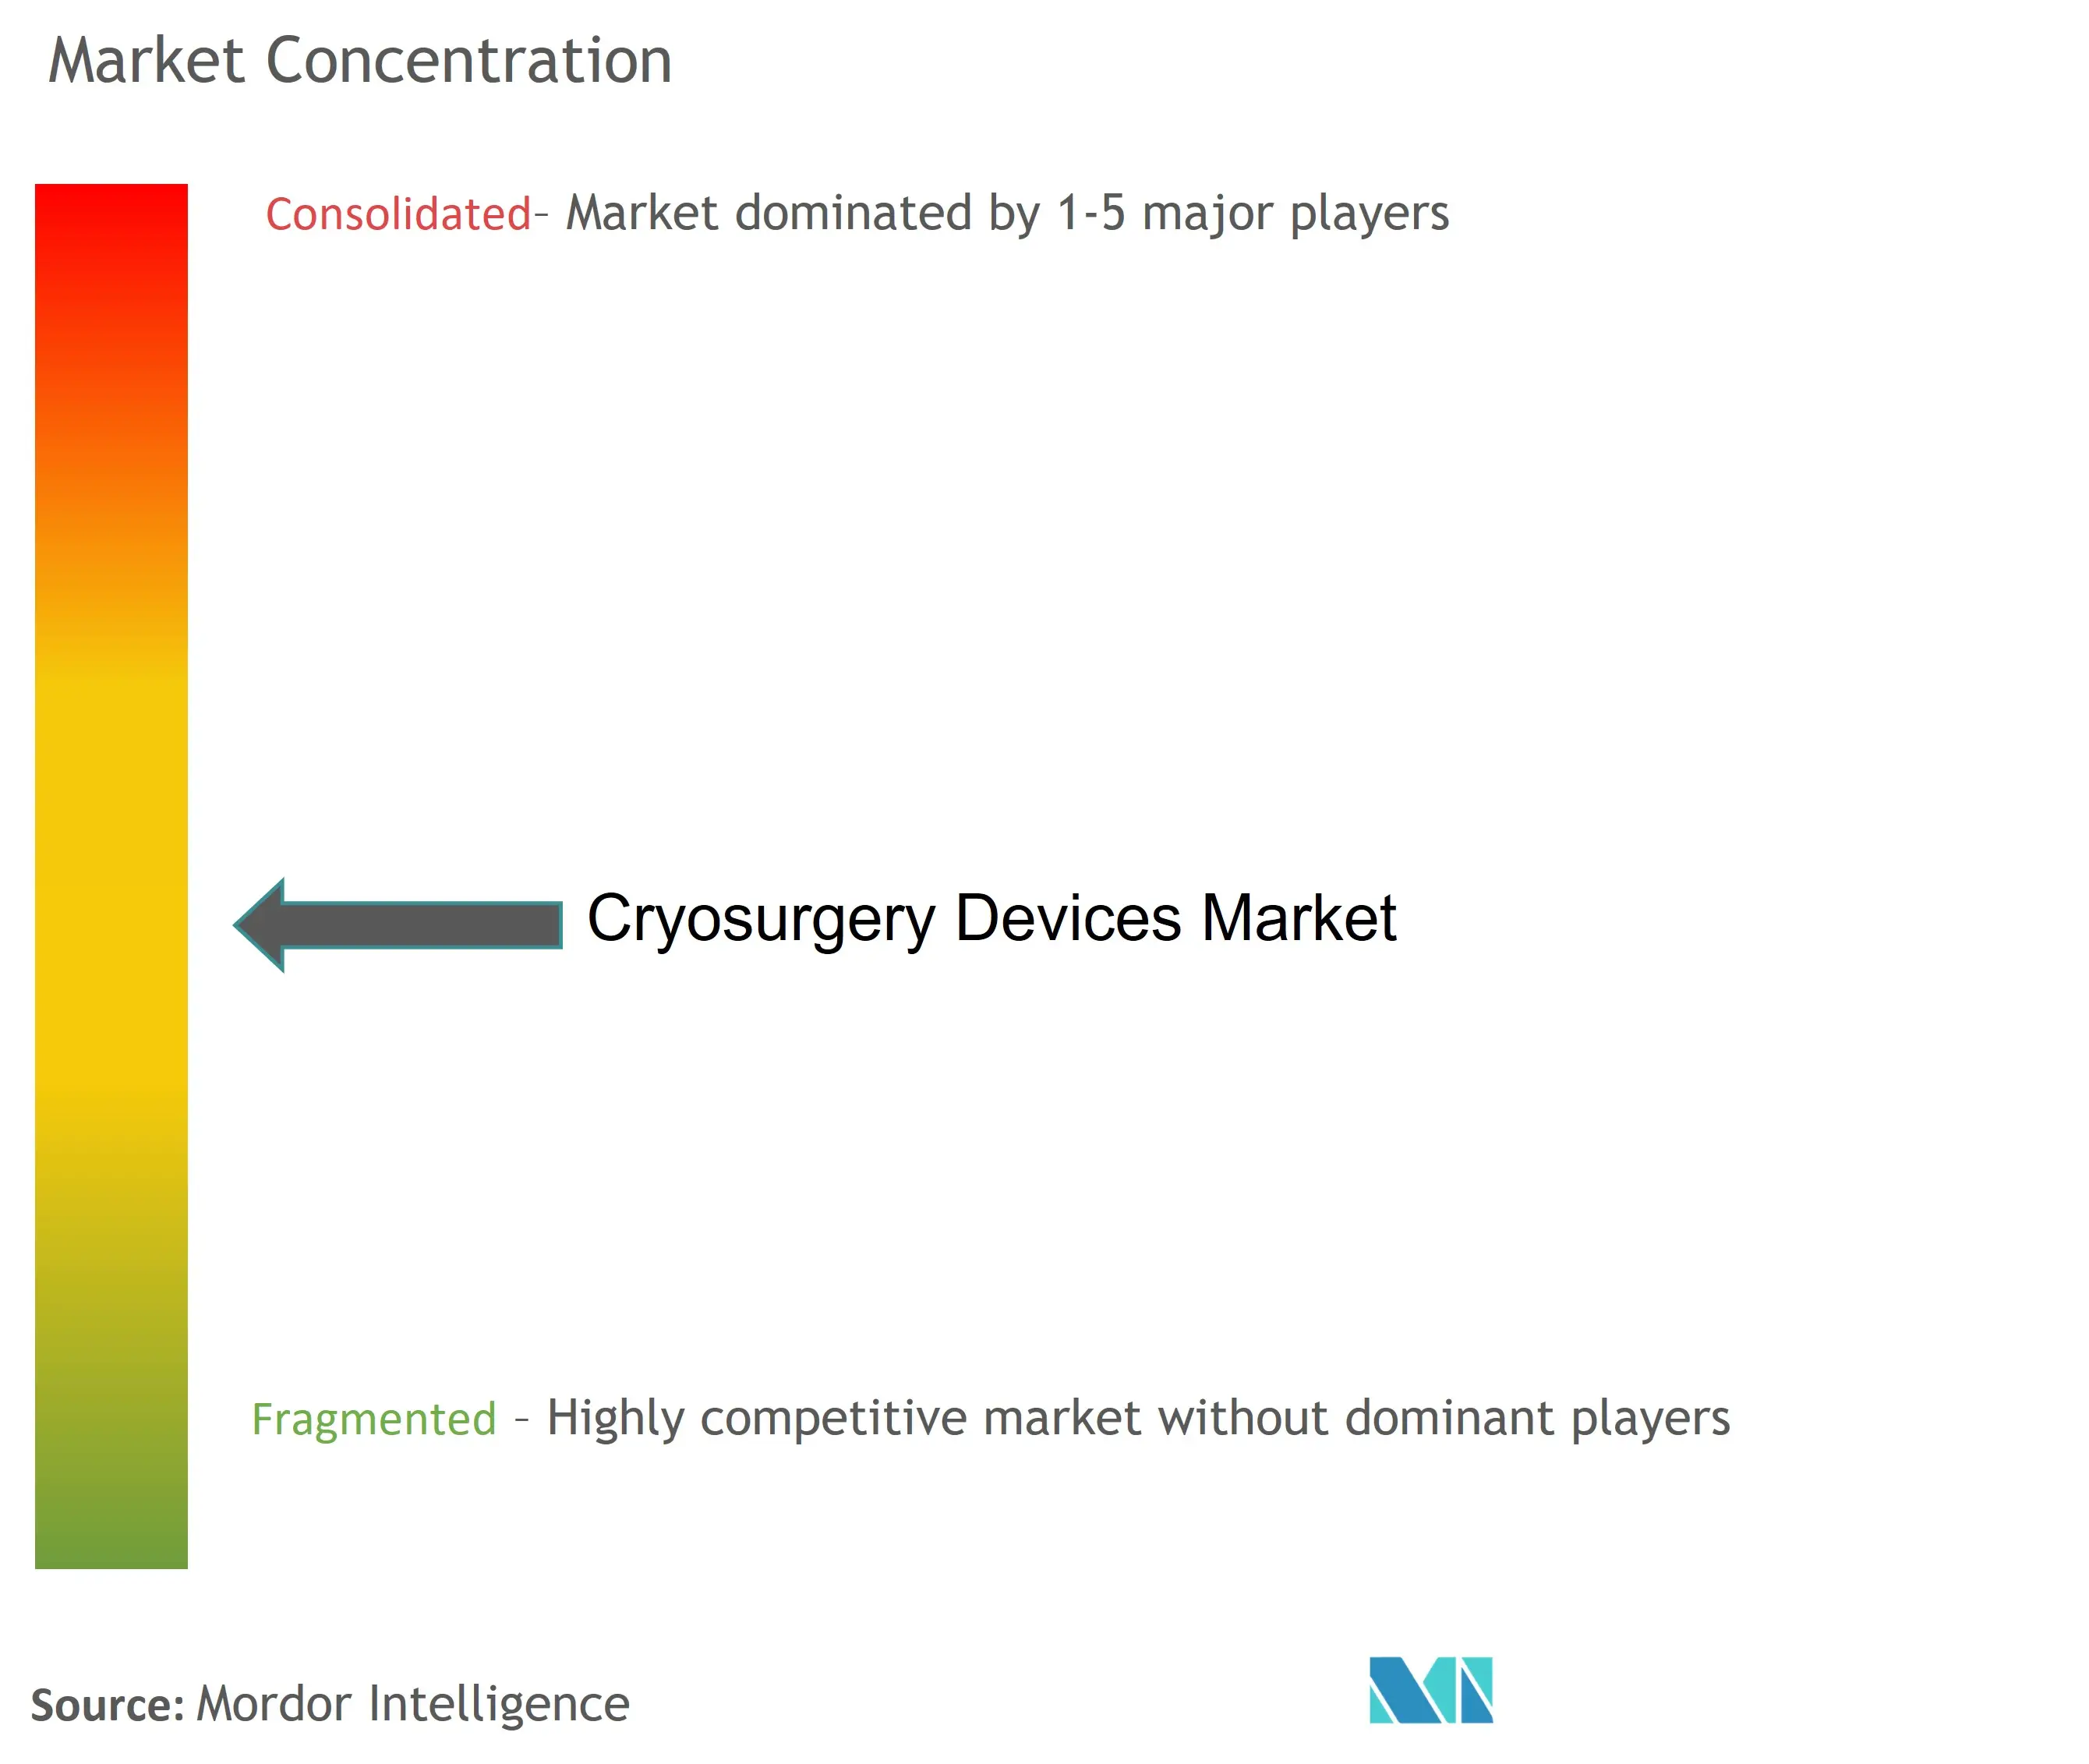 Cryosurgery Devices Market Concentration